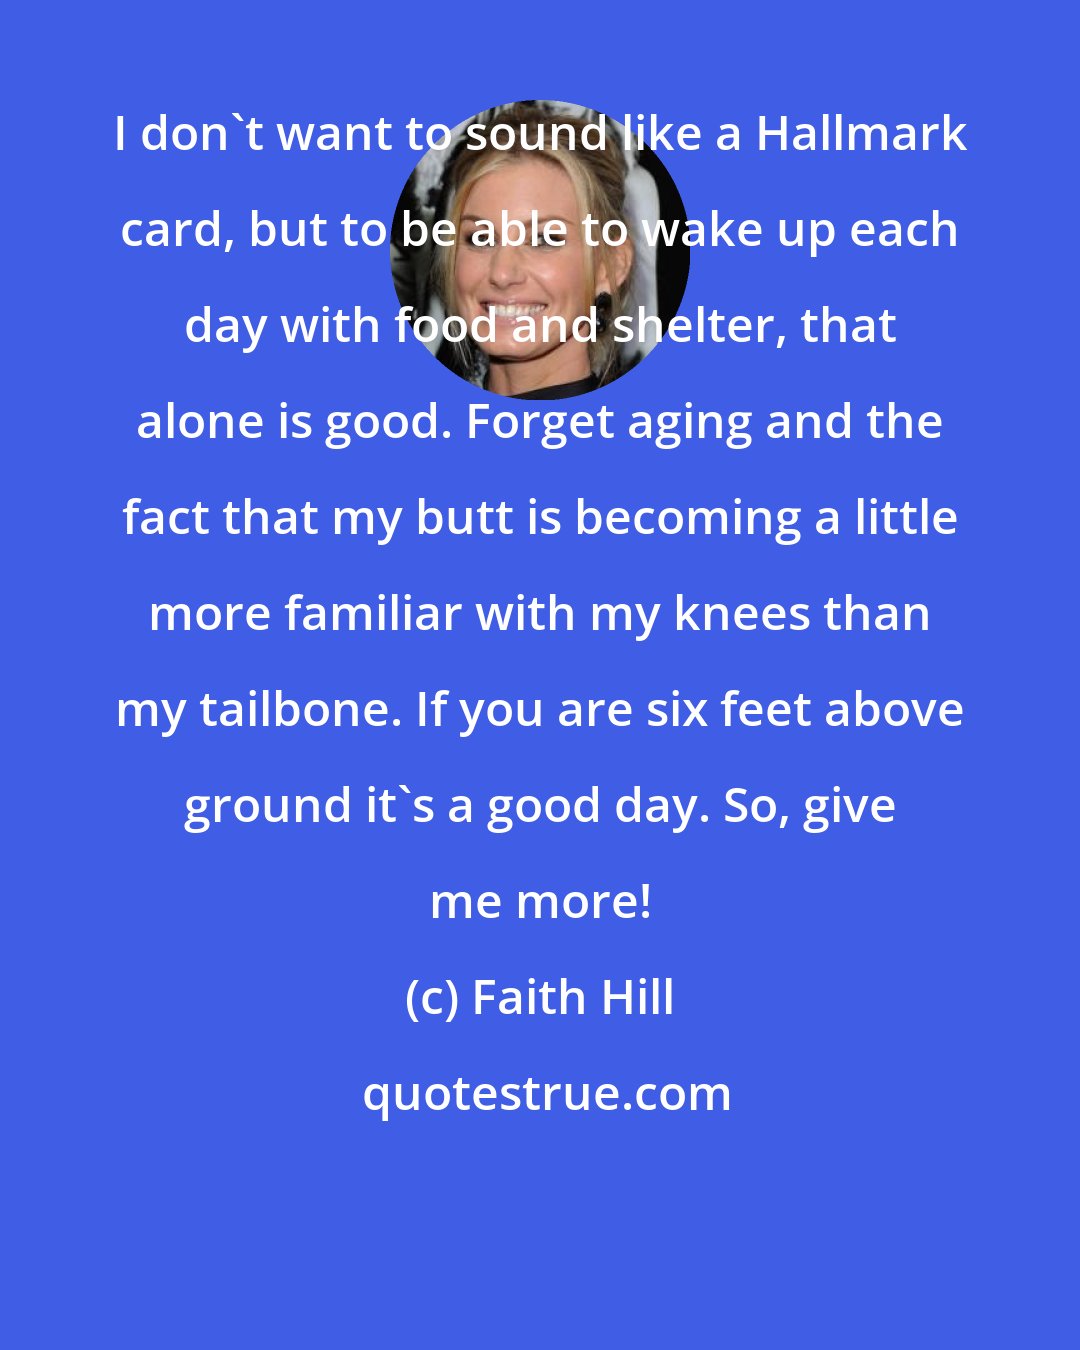 Faith Hill: I don't want to sound like a Hallmark card, but to be able to wake up each day with food and shelter, that alone is good. Forget aging and the fact that my butt is becoming a little more familiar with my knees than my tailbone. If you are six feet above ground it's a good day. So, give me more!